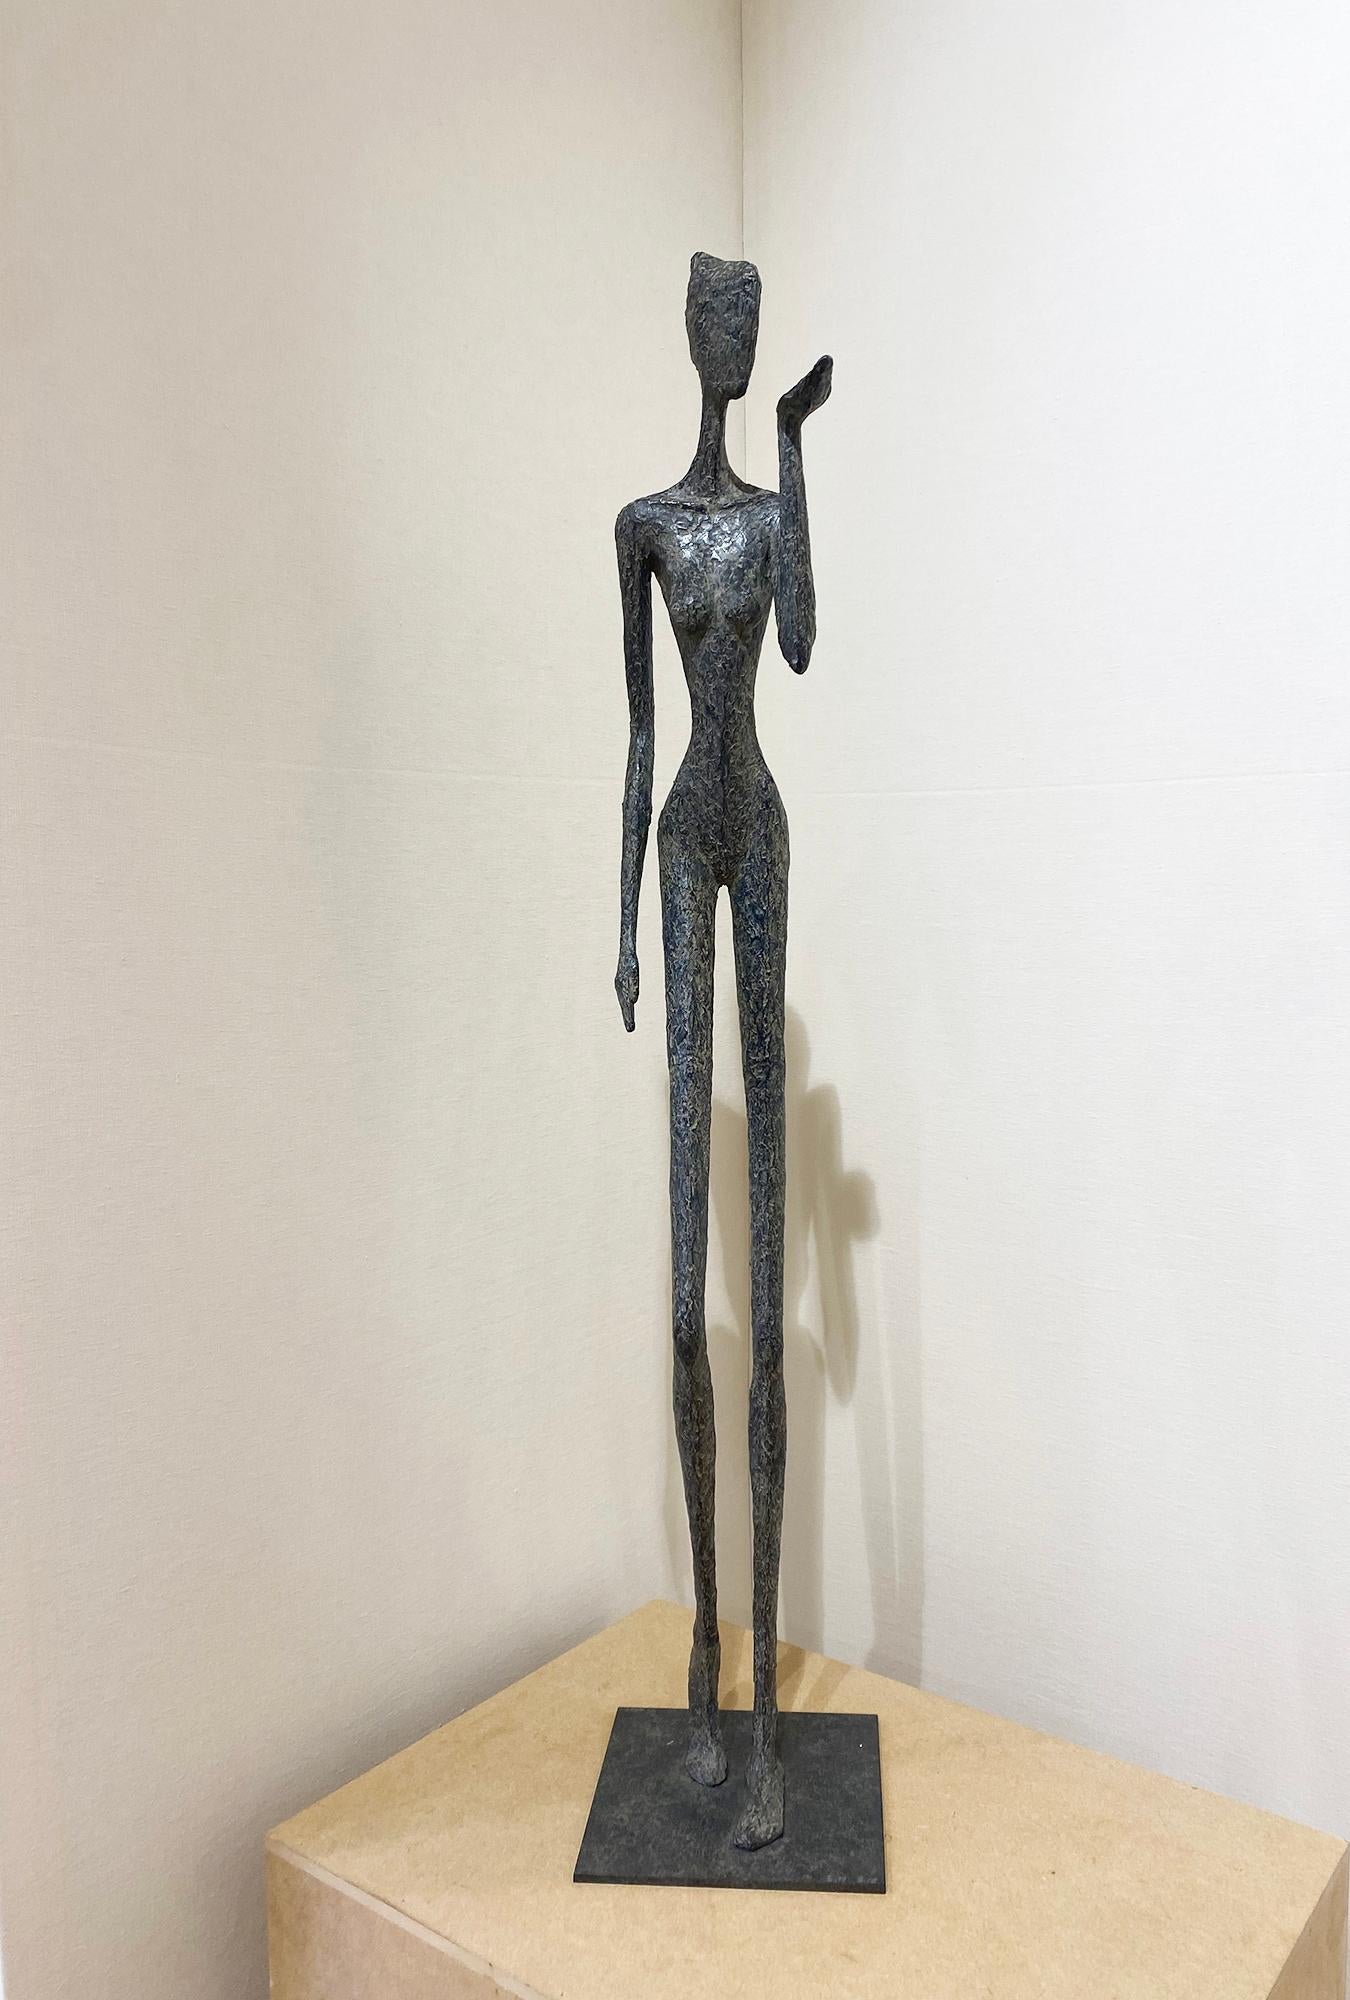  Sentiment figurative nude bronze woman blowing kiss Giacometti style S. Mangaud - Sculpture by Sylvie Mangaud